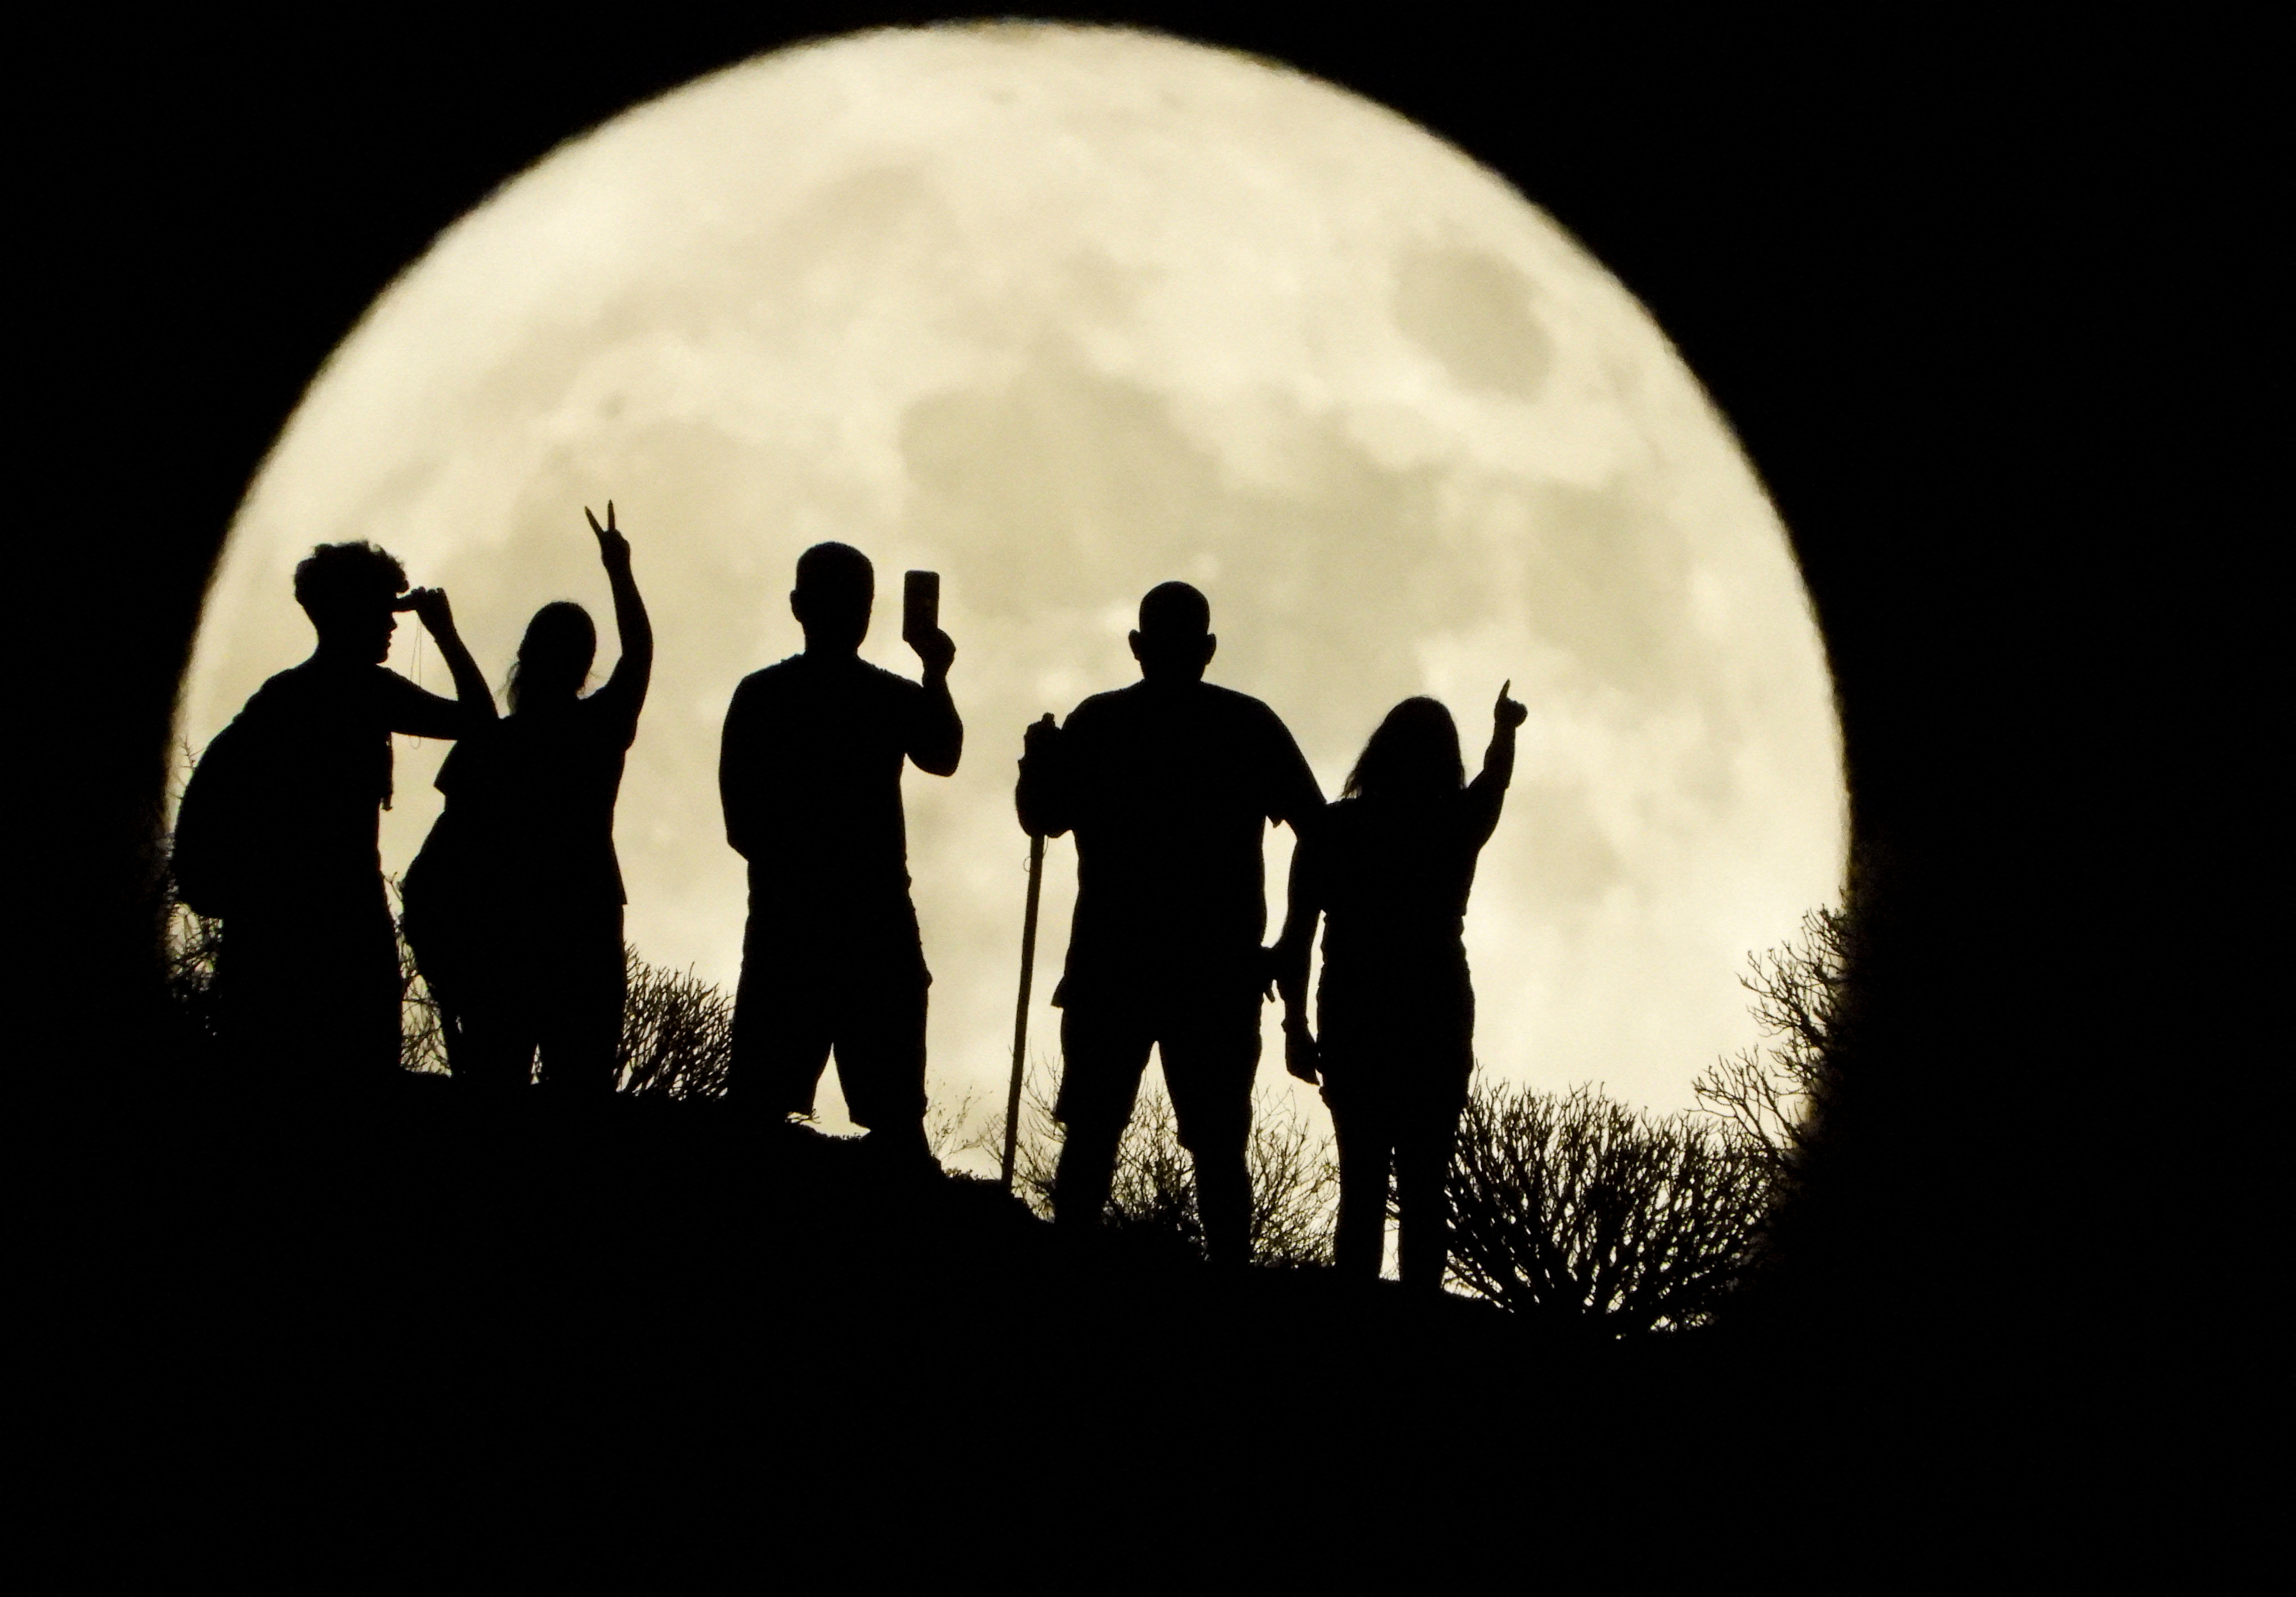 People stand with the full moon known as the 